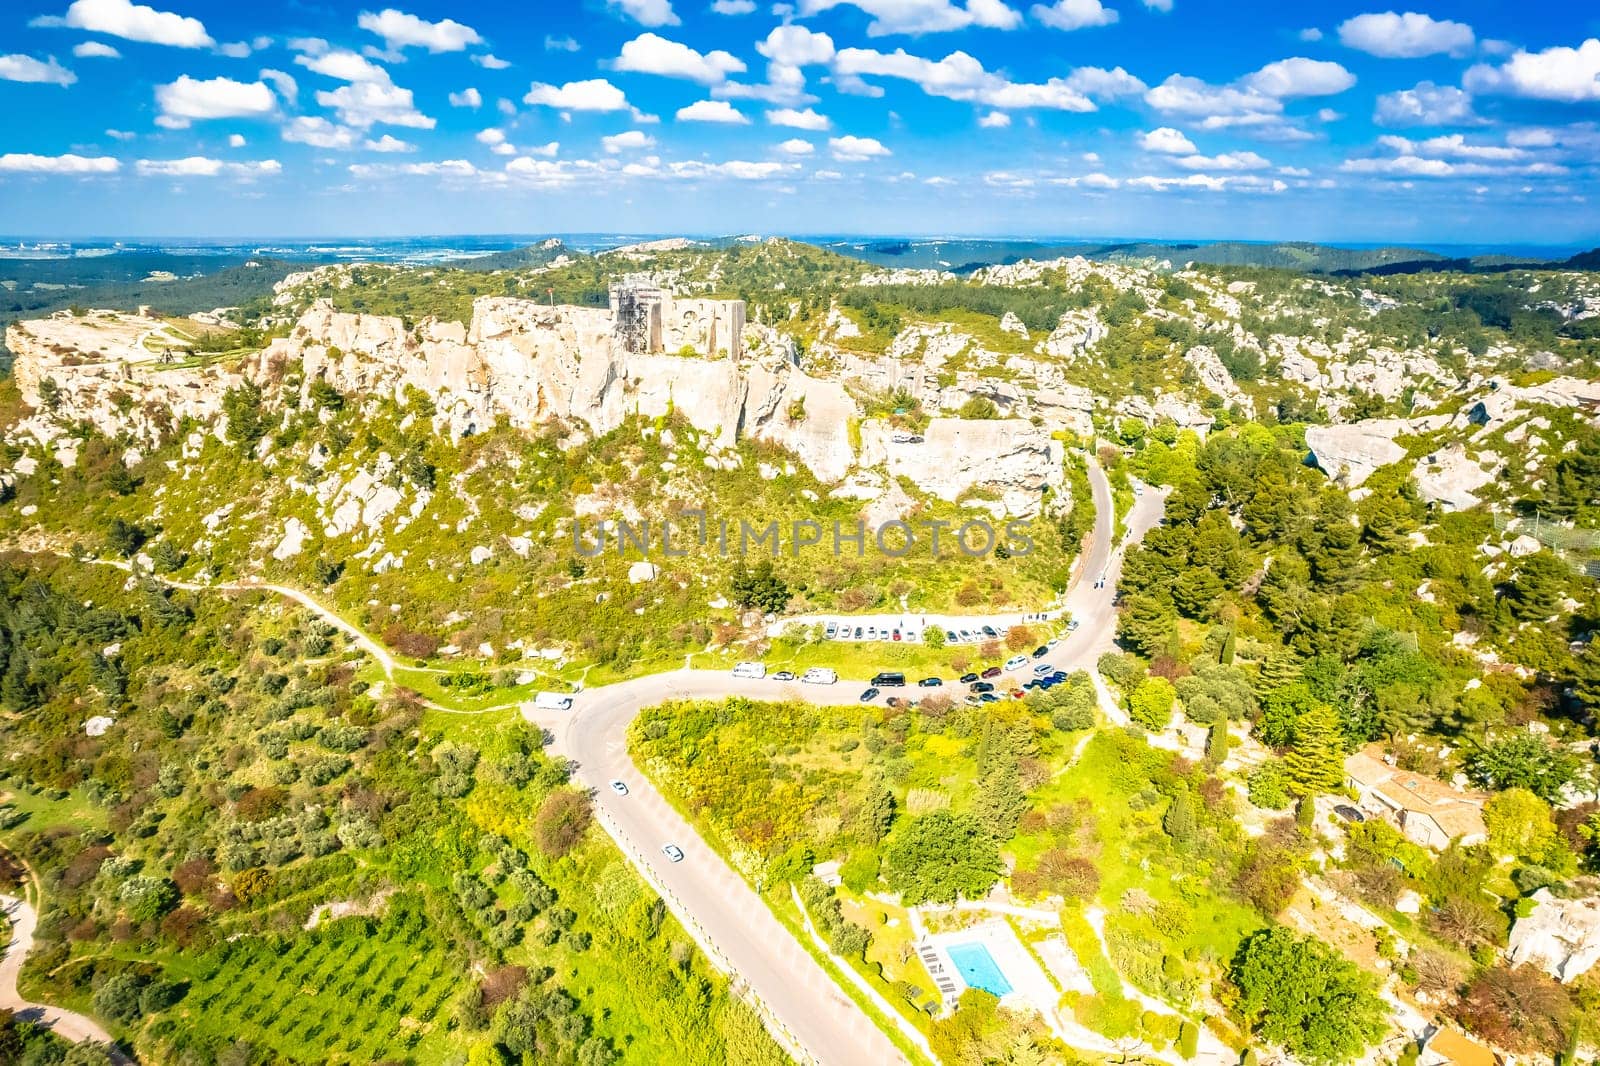 Les Baux de Provence scenic town on the rock aerial view by xbrchx